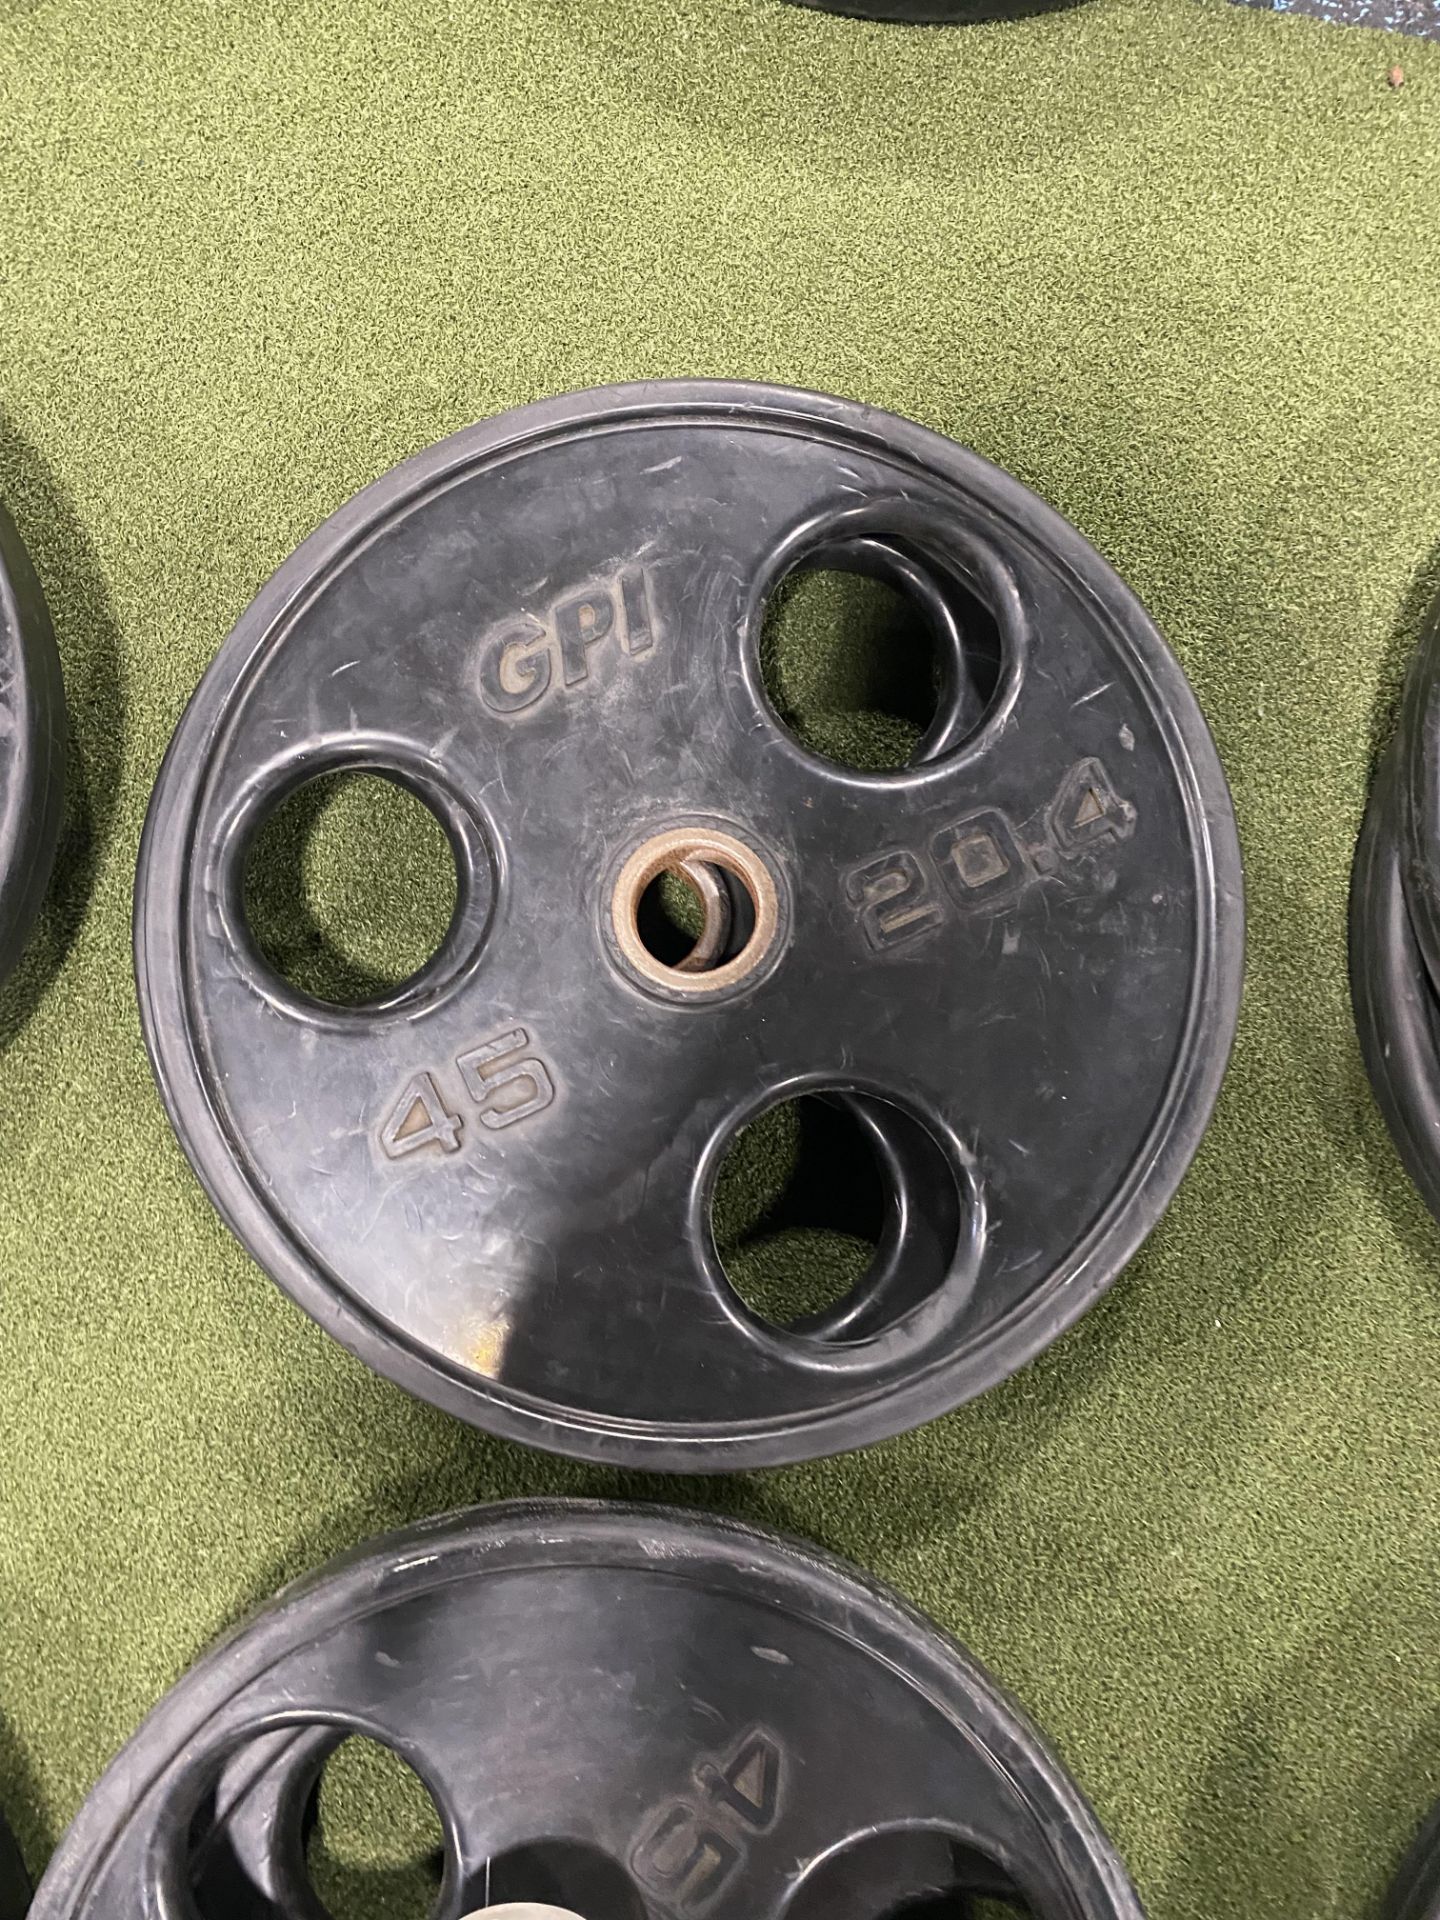 (Lot) (4) 45lb. Plates, (2) 25Lb Bumper Plates, and (2) 10lb Bumper Plates - Image 3 of 5